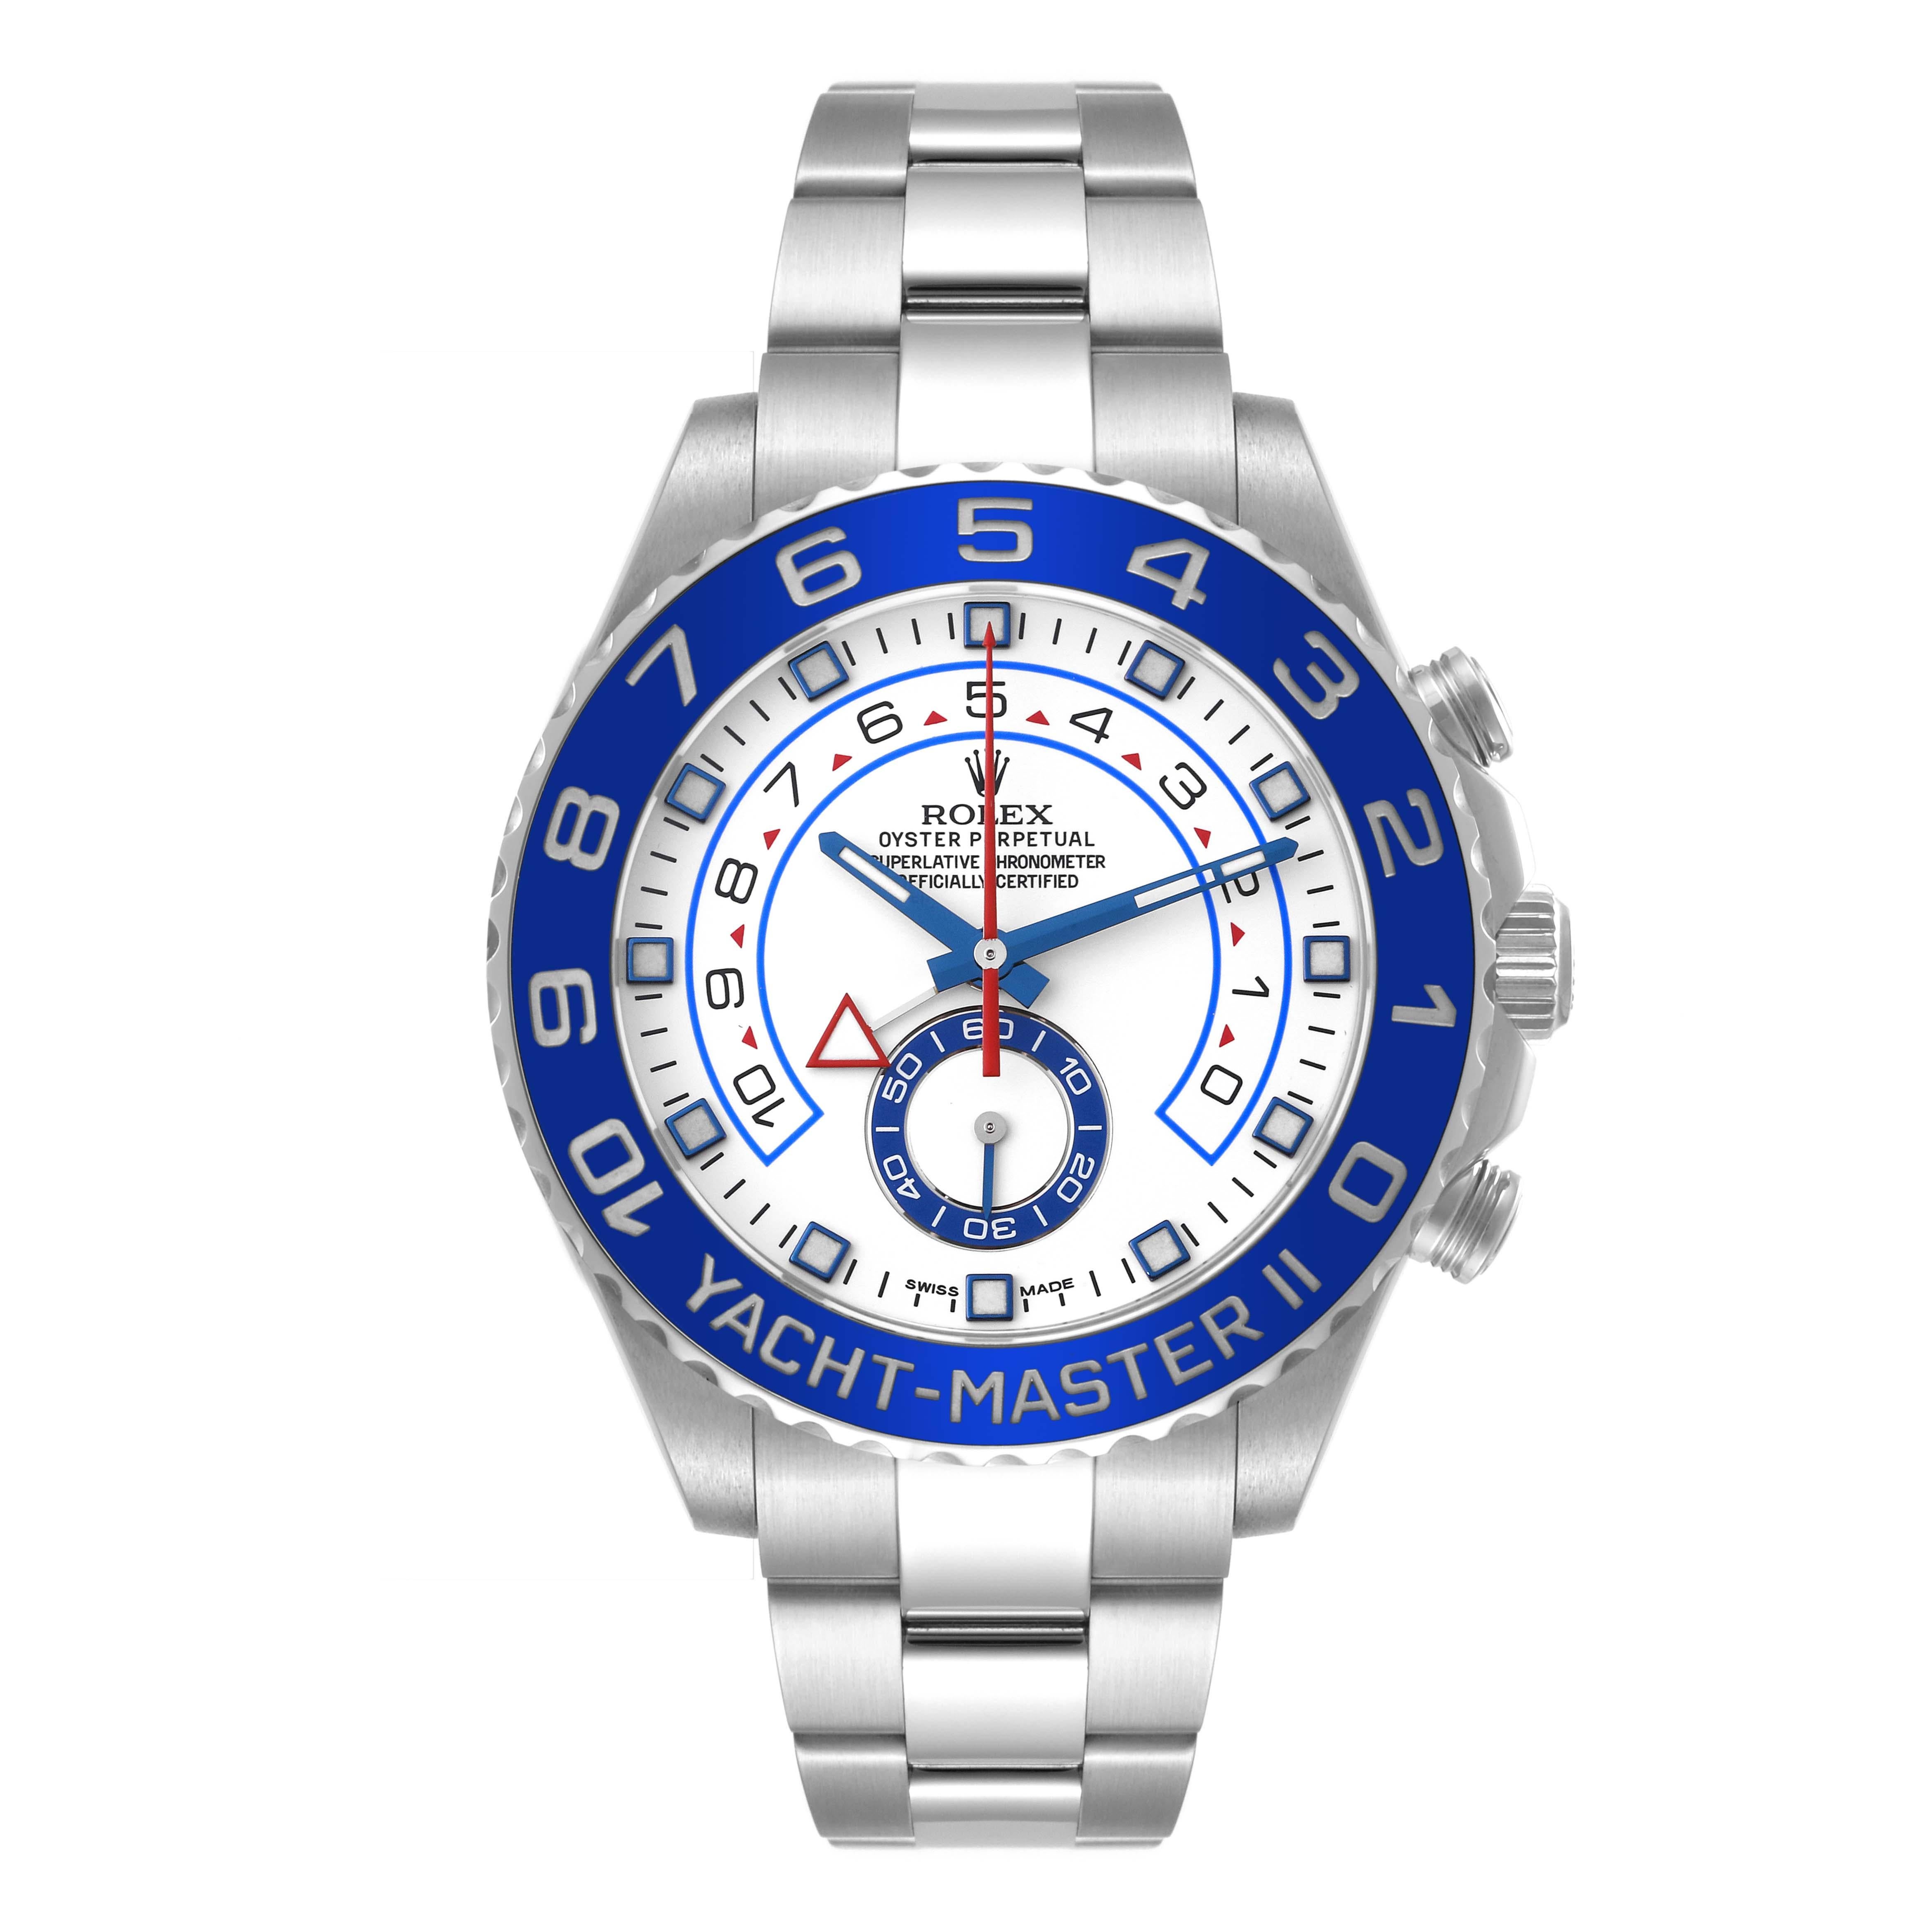 Rolex Yachtmaster II 44 Blue Cerachrom Bezel Steel Mens Watch 116680 Box Card. Officially certified chronometer automatic self-winding movement with Regatta chronograph function. Stainless steel case 44.0 mm in diameter. Screw down crown and